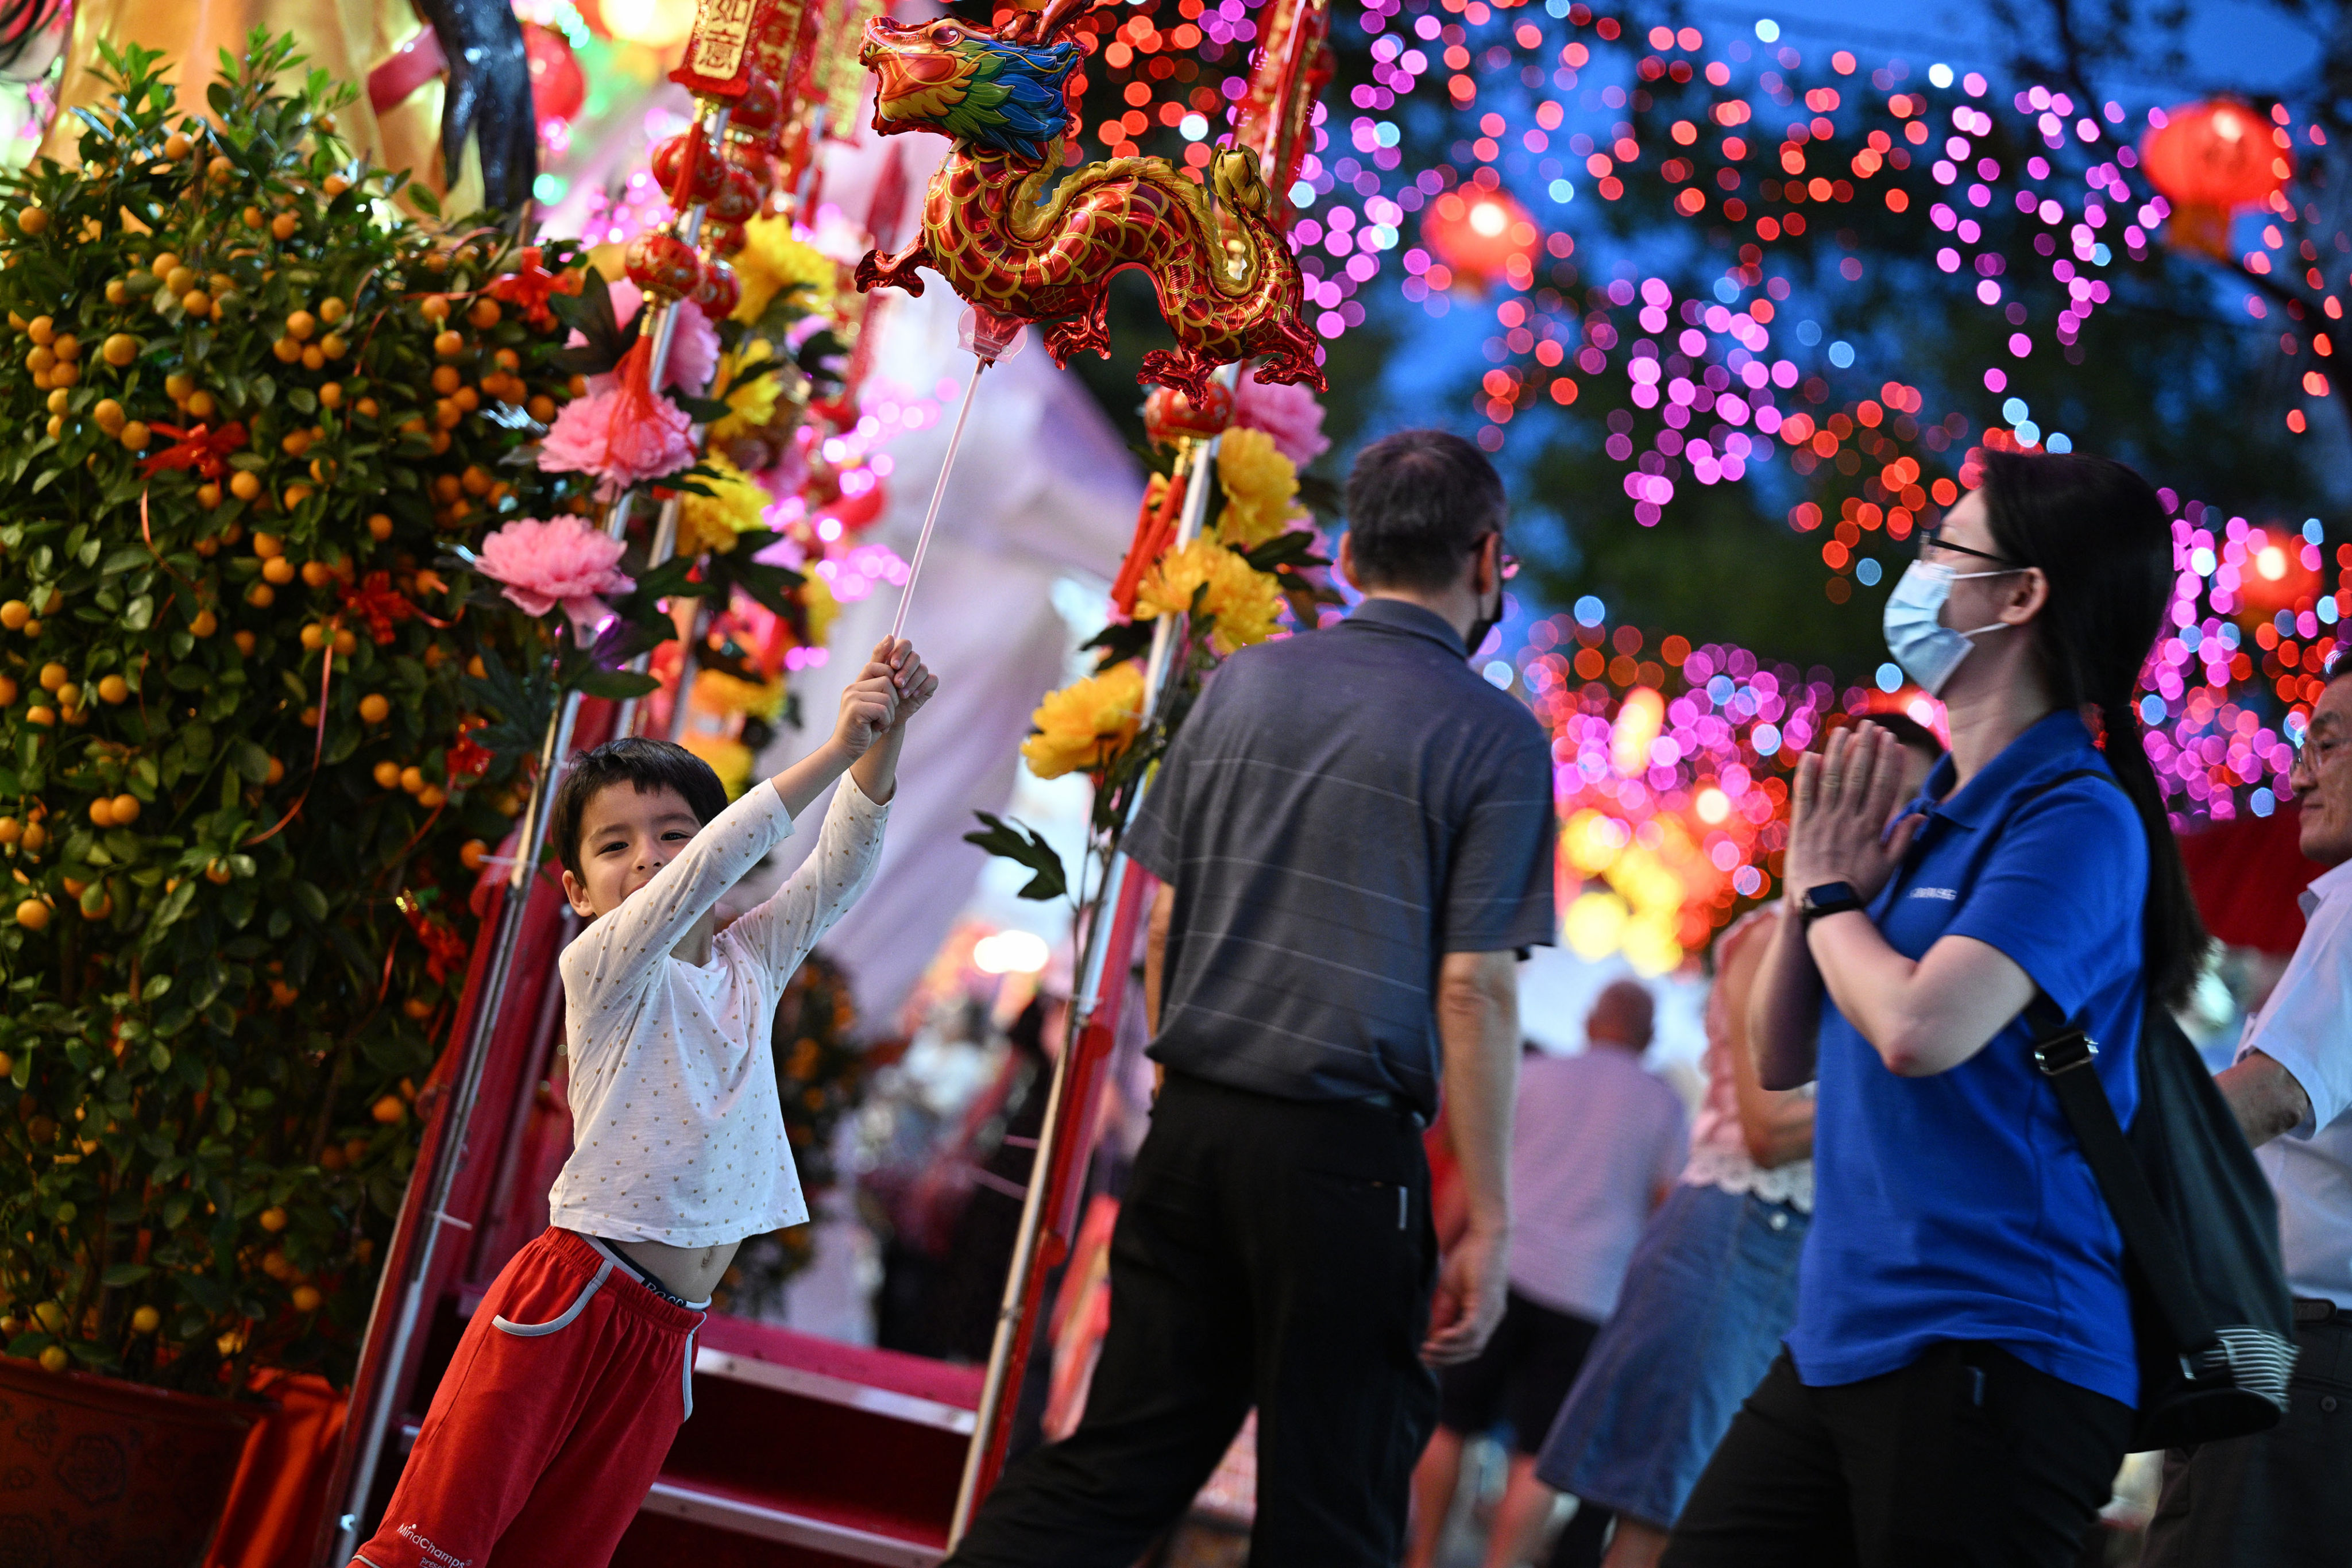 A child poses with a dragon-shaped balloon at a market for Lunar New Year in Singapore. Photo: Xinhua